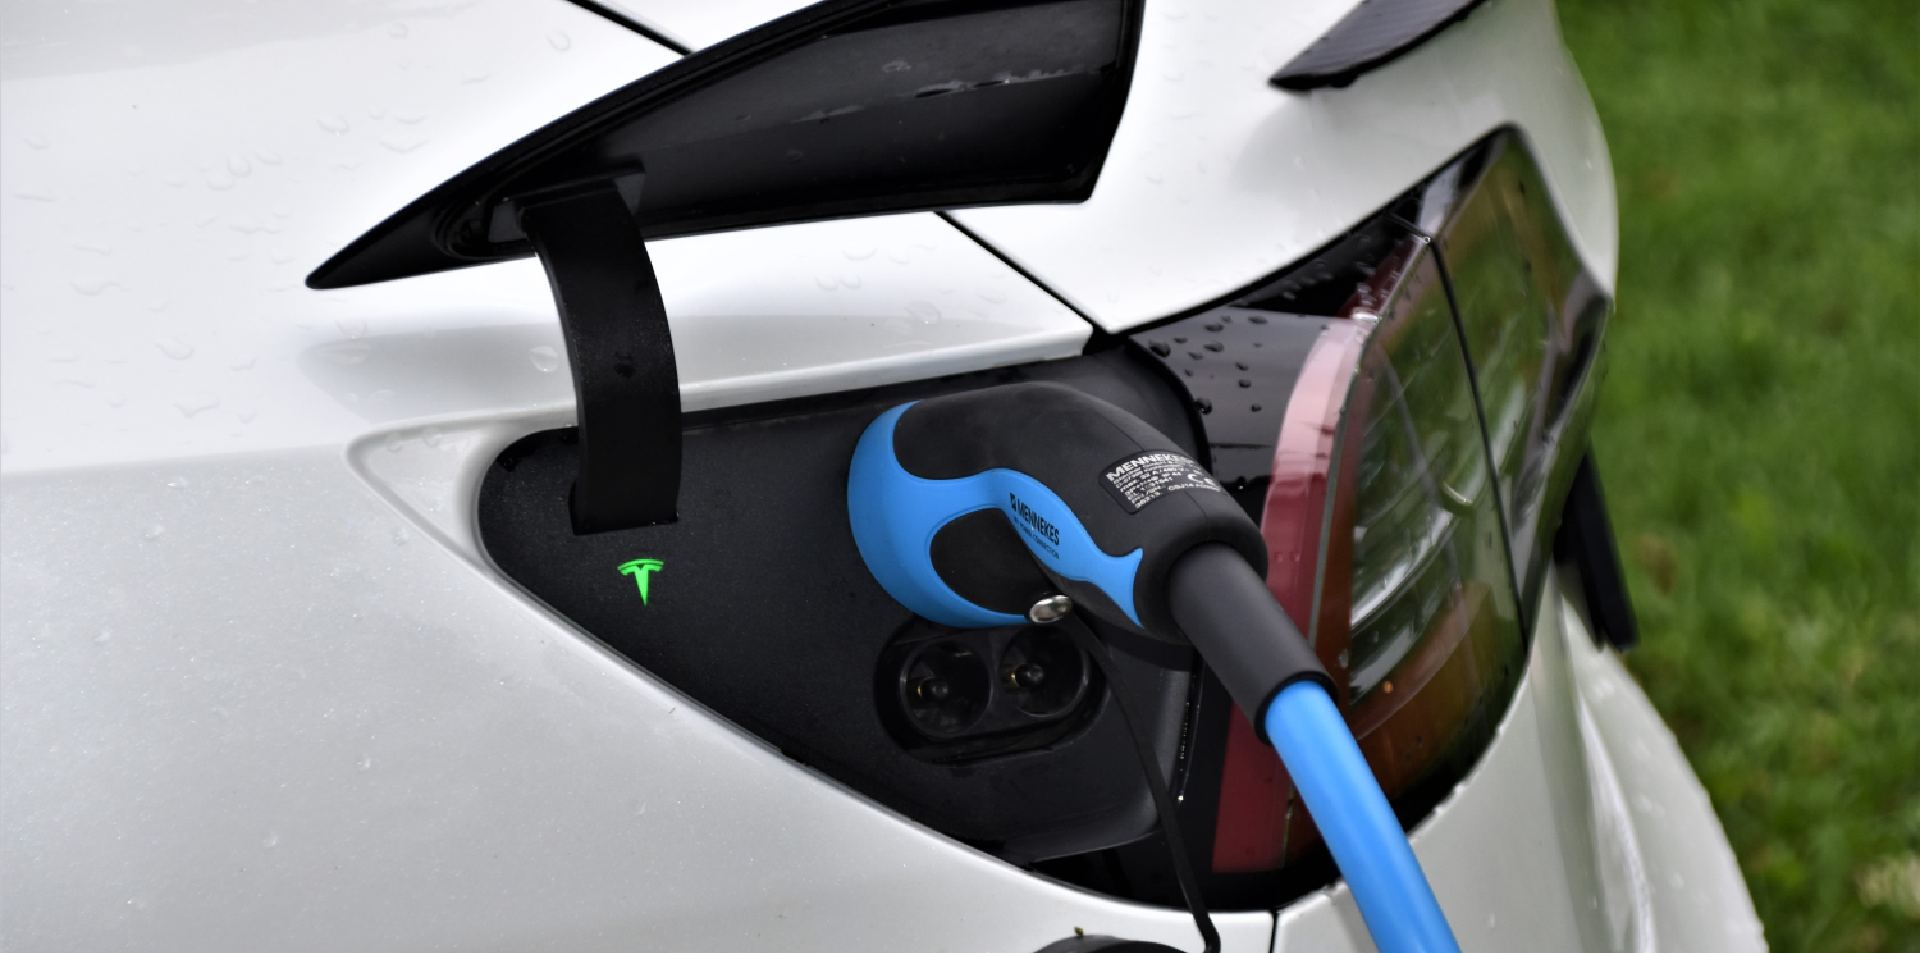 EV batteries charge in 5 minutes - here's advantage and disadvantage